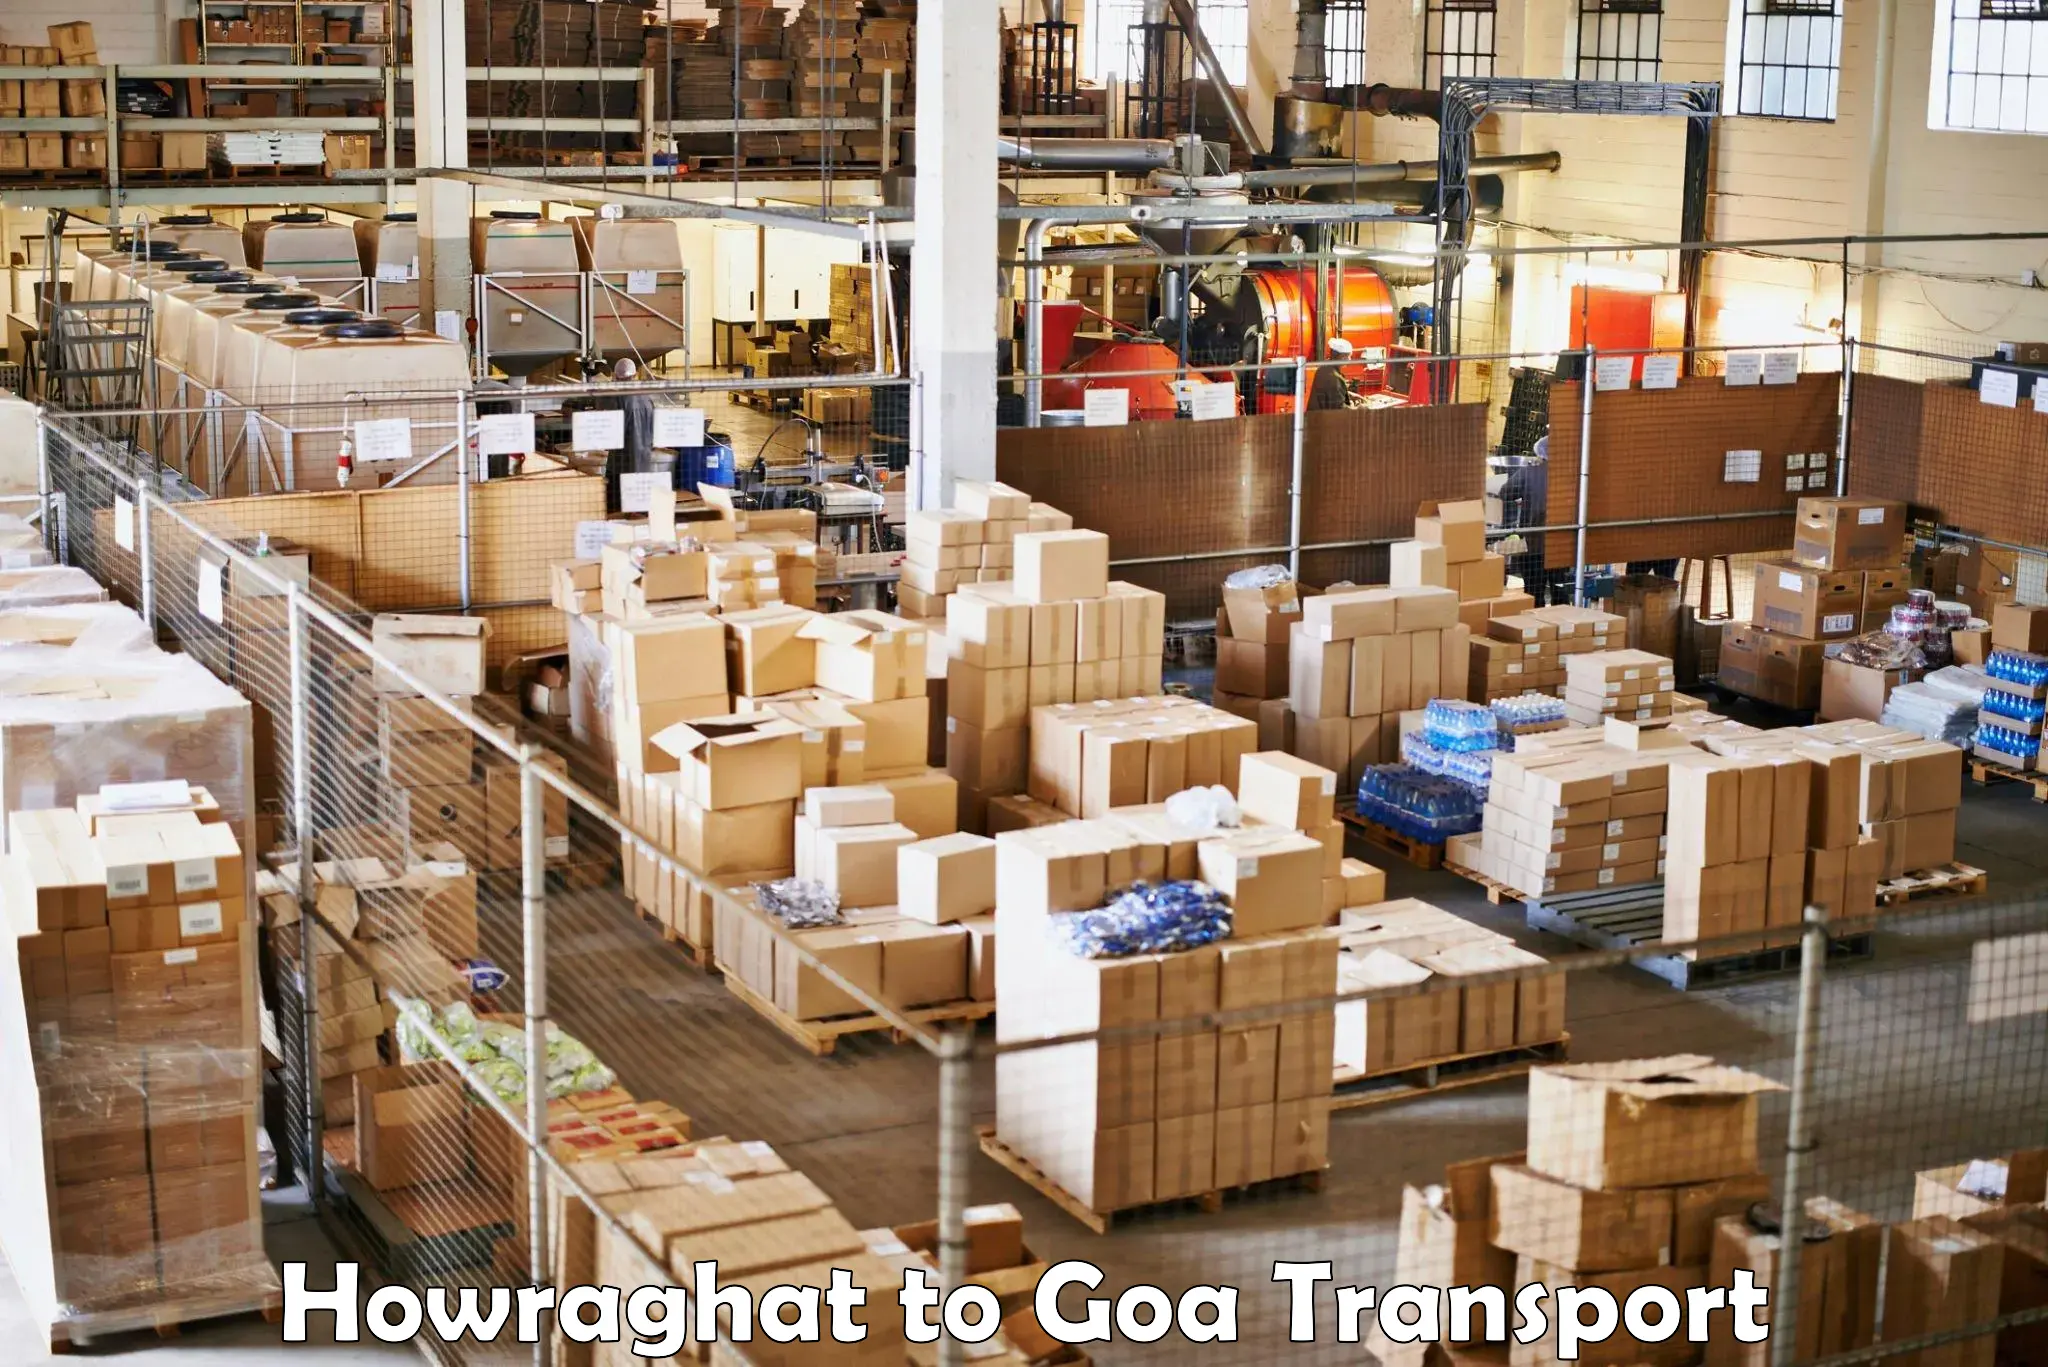 Commercial transport service Howraghat to Panjim